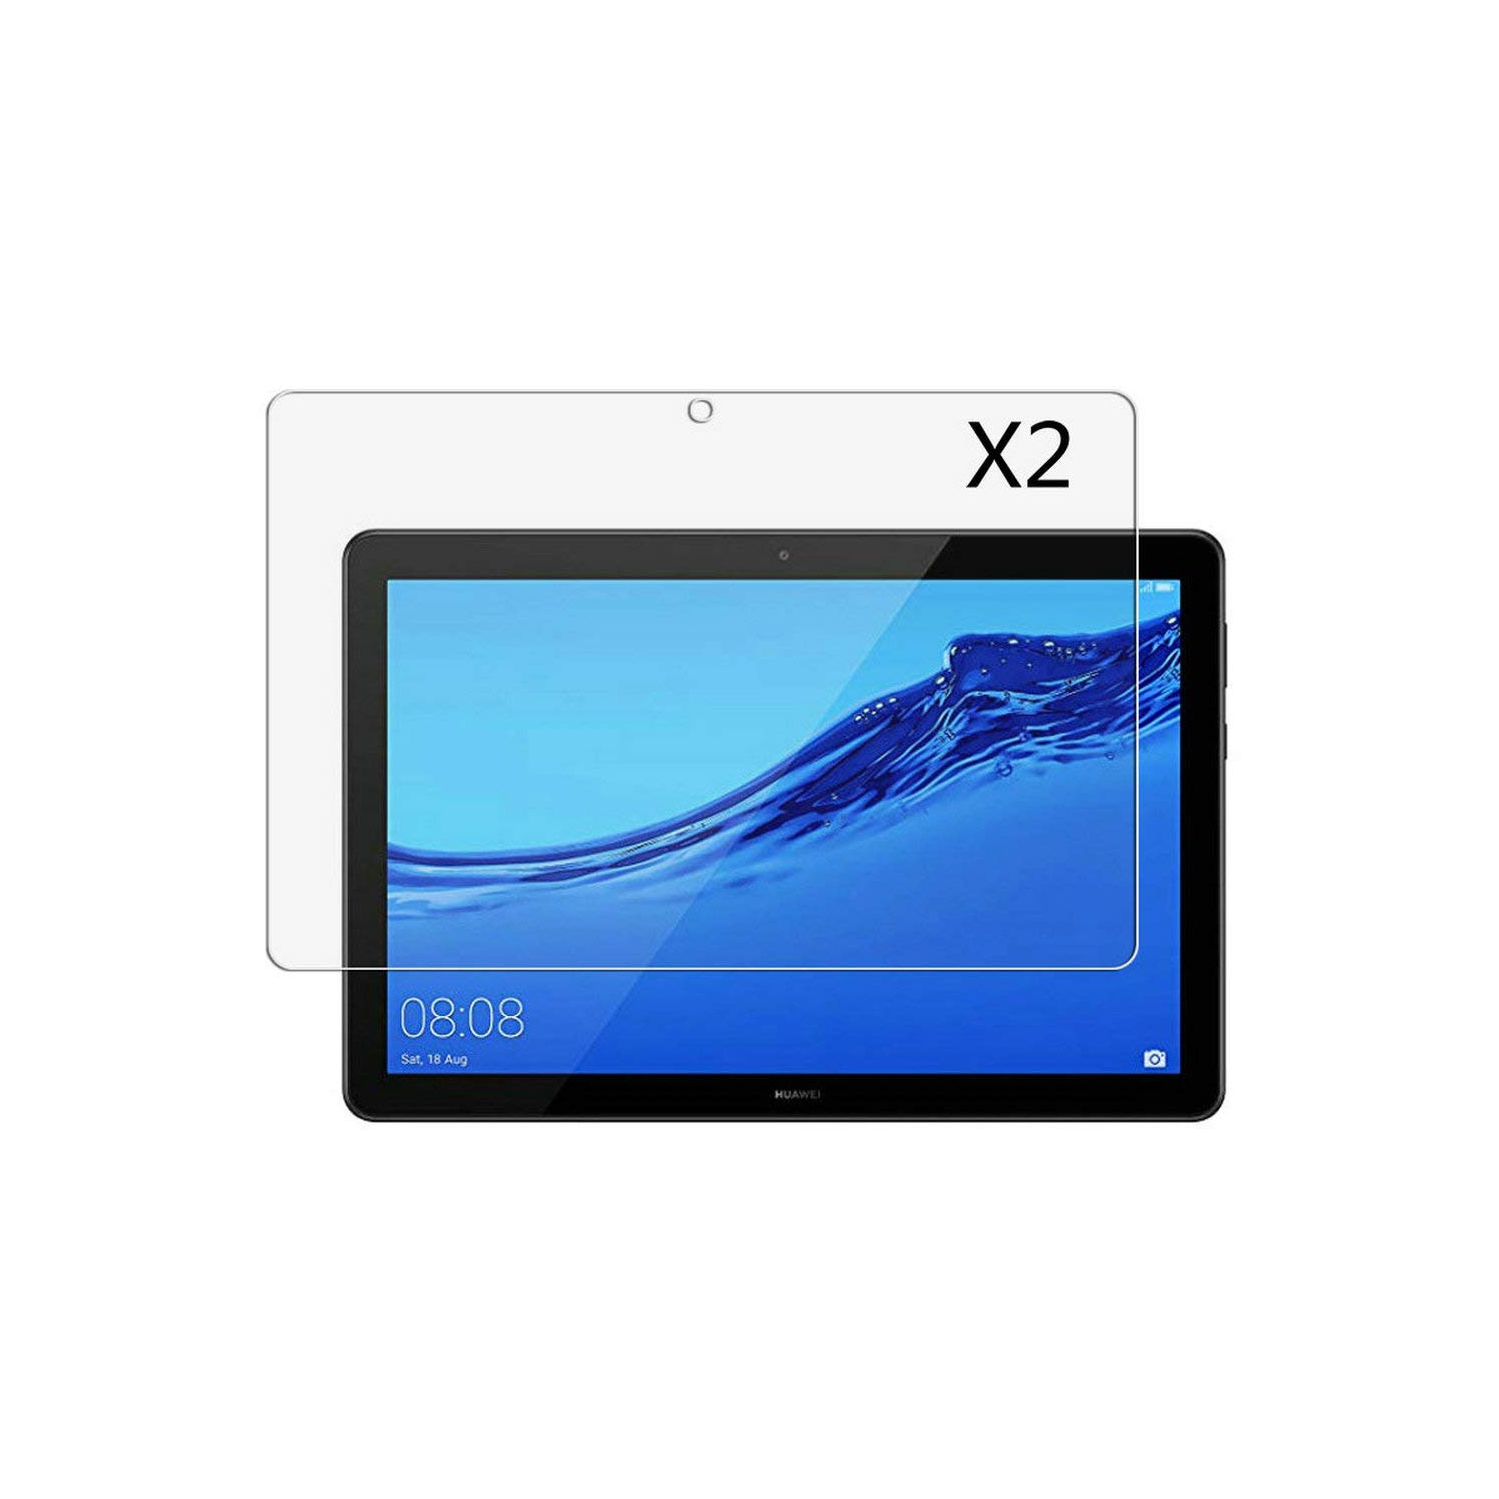 HYFAI Premium Tempered Glass Screen Protector for Huawei Mediapad Tablet T5 10 10.1" -2 Pack